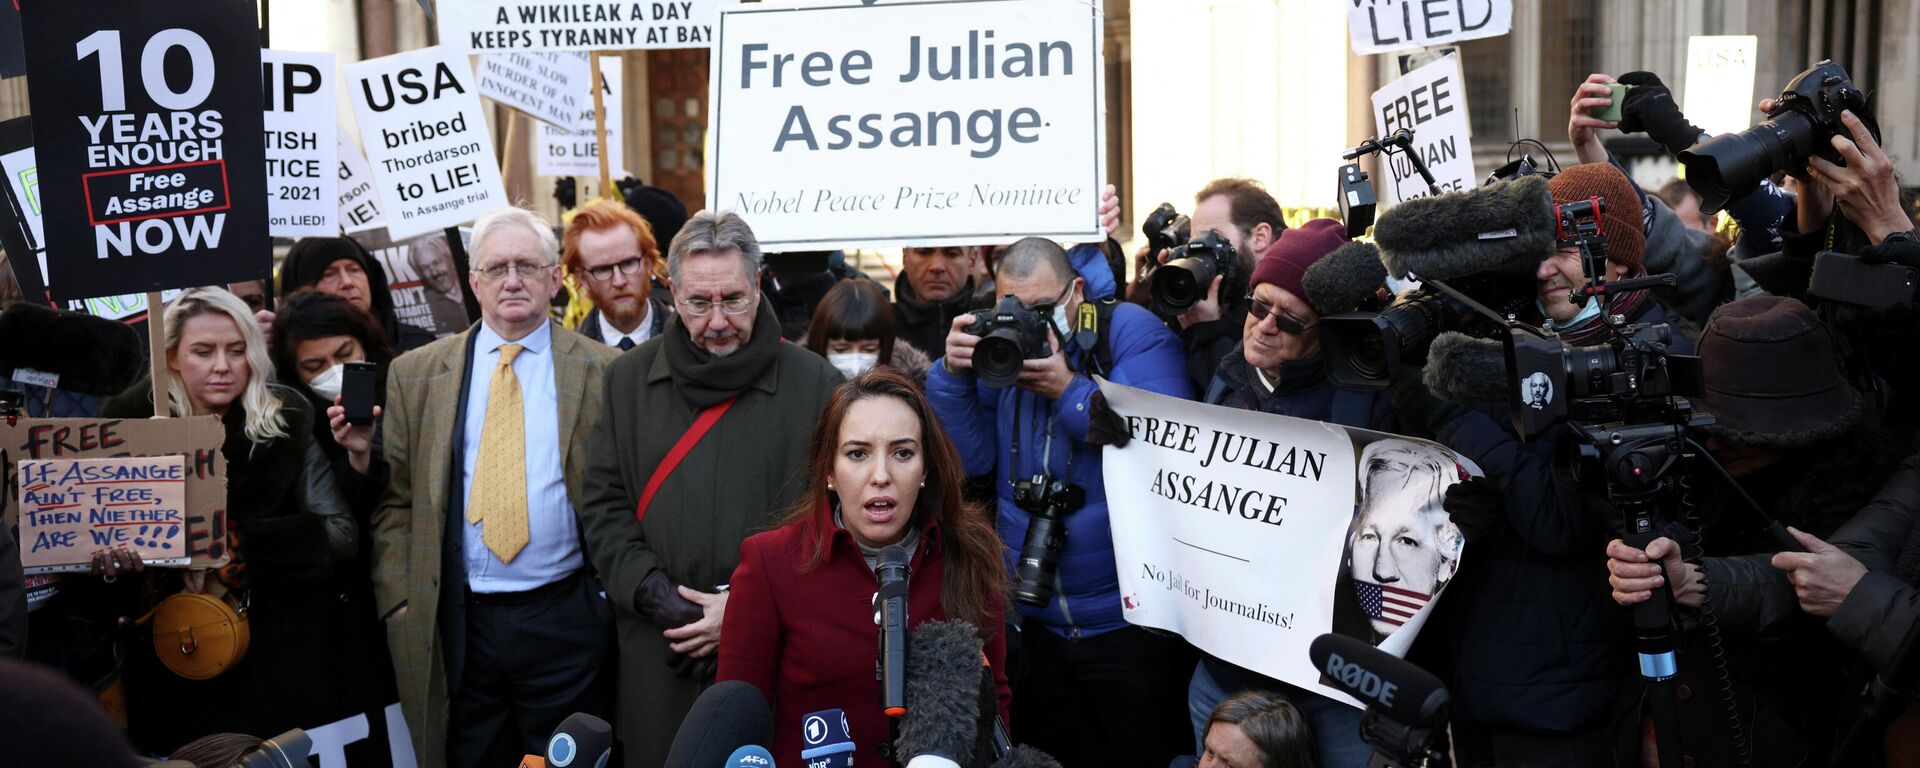 Stella Morris, partner of Wikileaks founder Julian Assange, speaks to media outside the Royal Courts of Justice following the appeal against Assange's extradition in London, Britain December 10, 2021. - Sputnik International, 1920, 10.12.2021